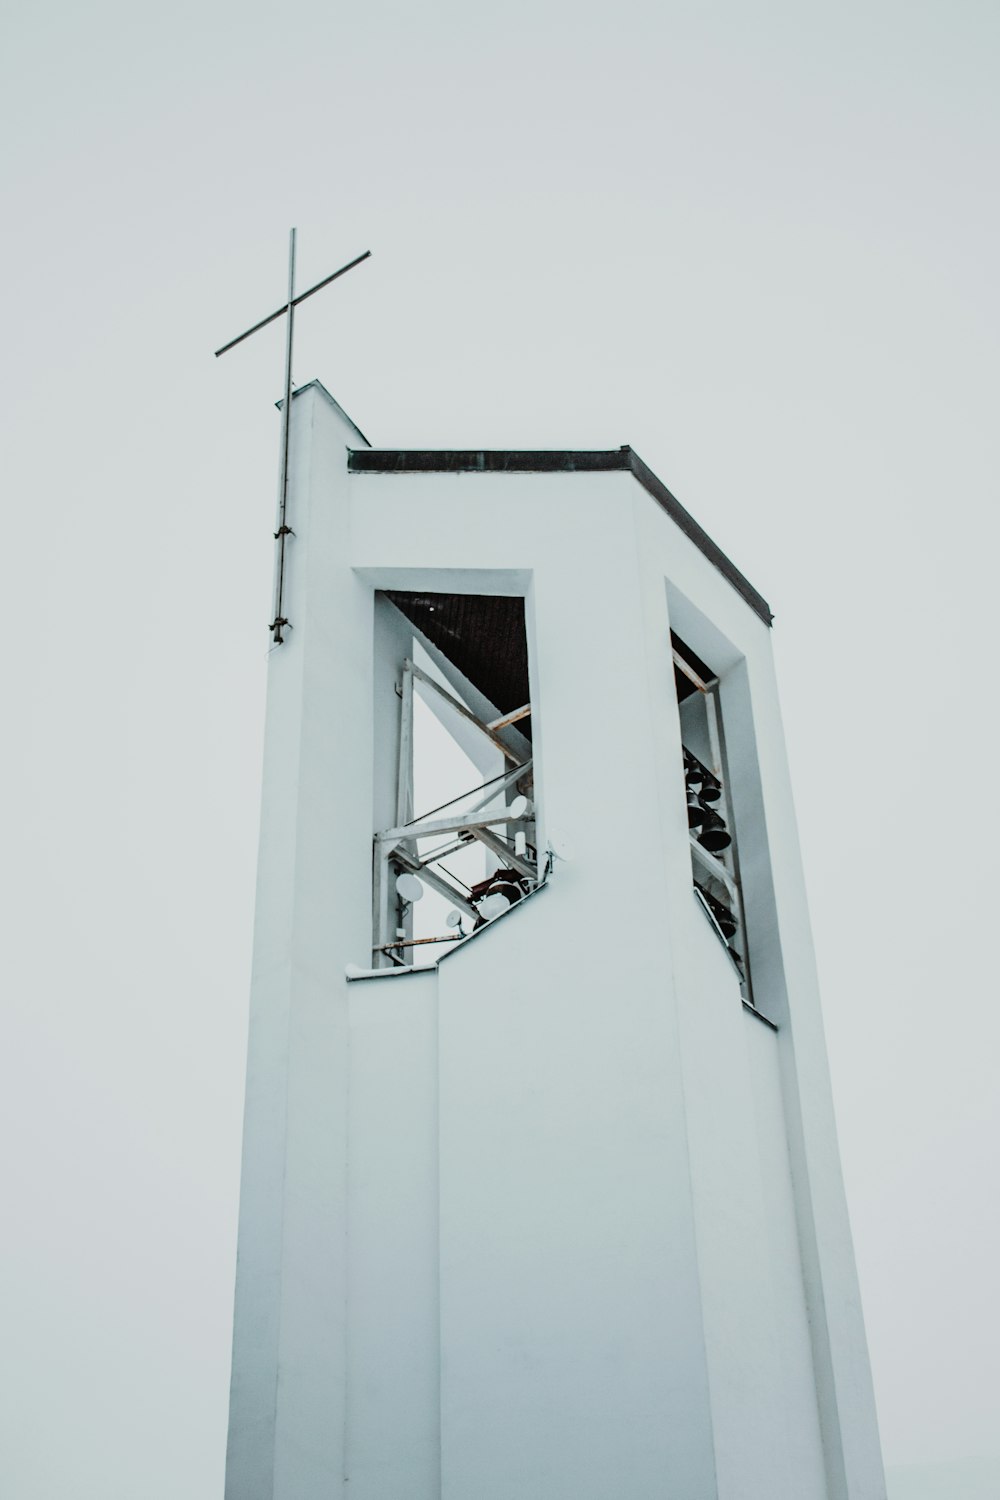 a tall white tower with a cross on top of it